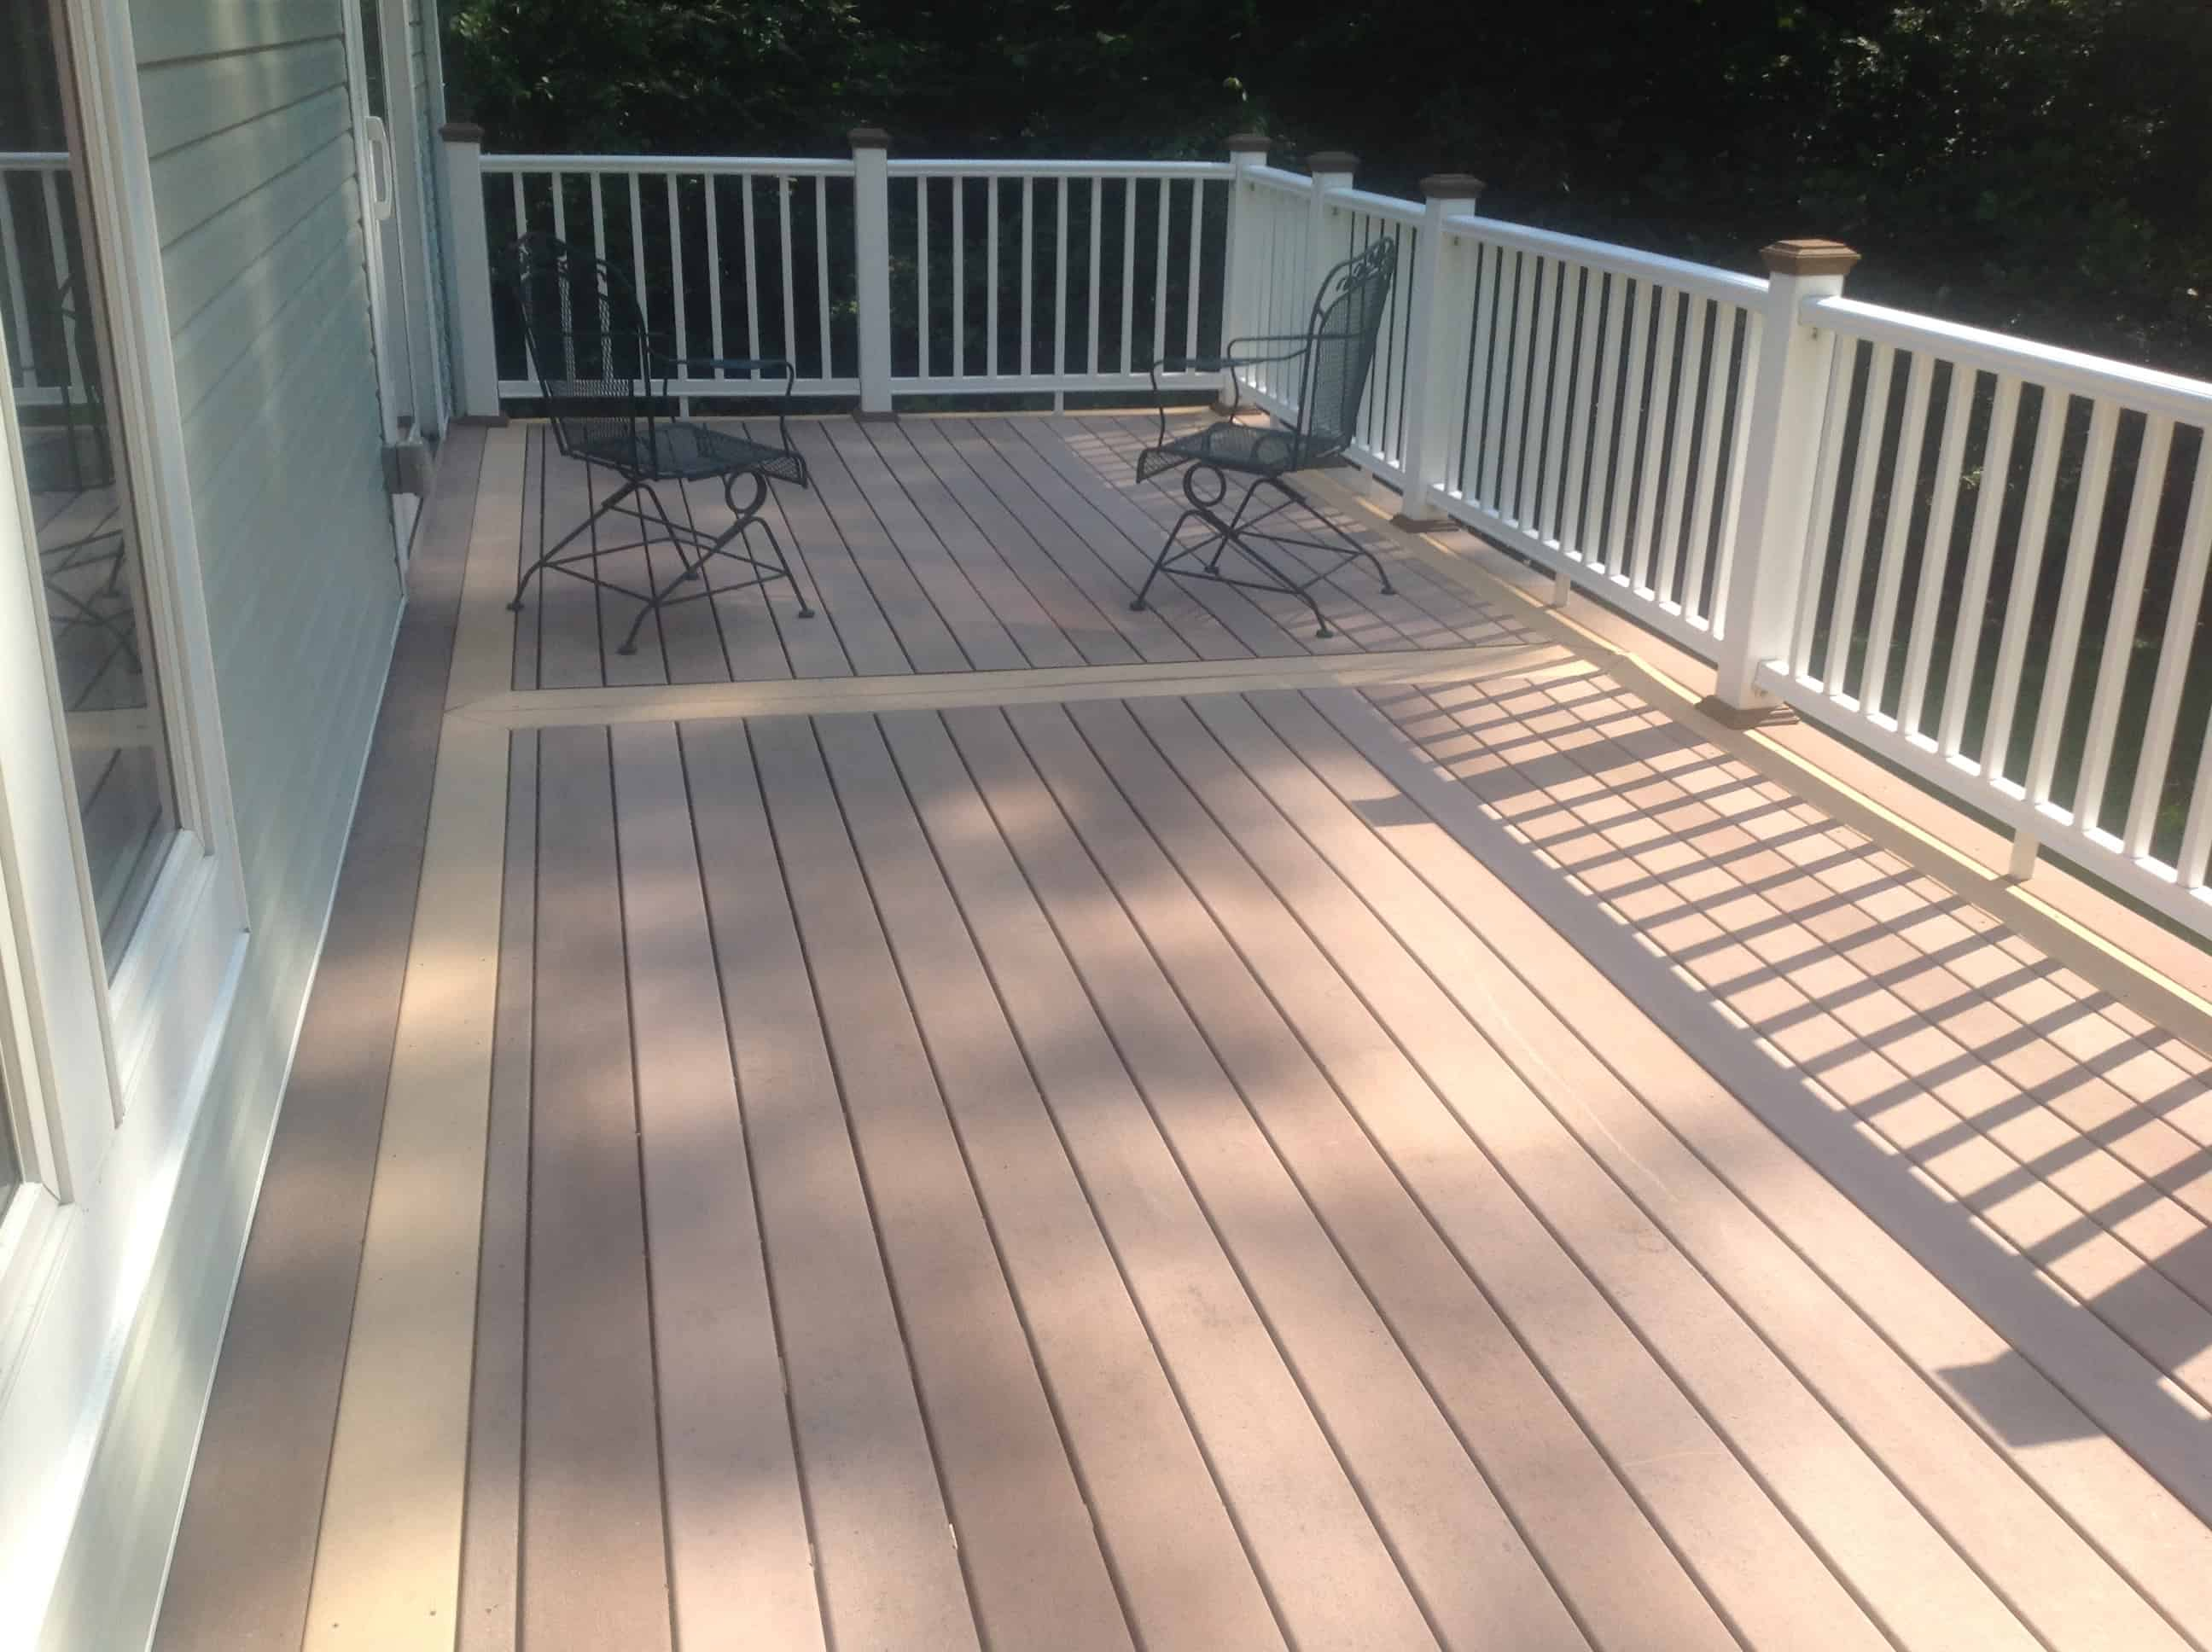 Wood And Composite Decking Pros Cons A Sturdy Wooden Deck Homemade regarding size 2592 X 1936